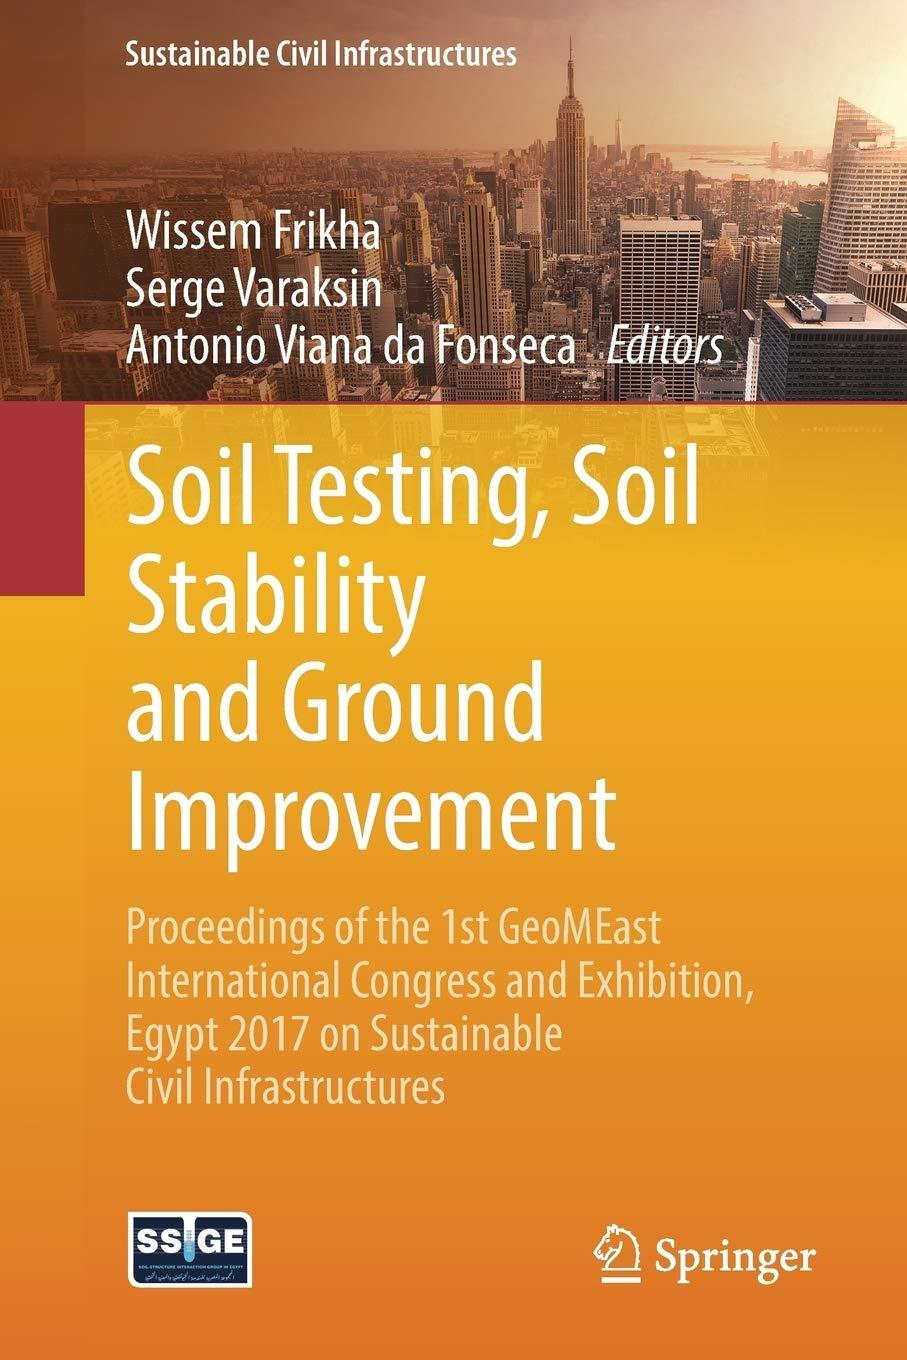 soil testing soil stability and ground improvement proceedings of the 1st geomeast international congress and